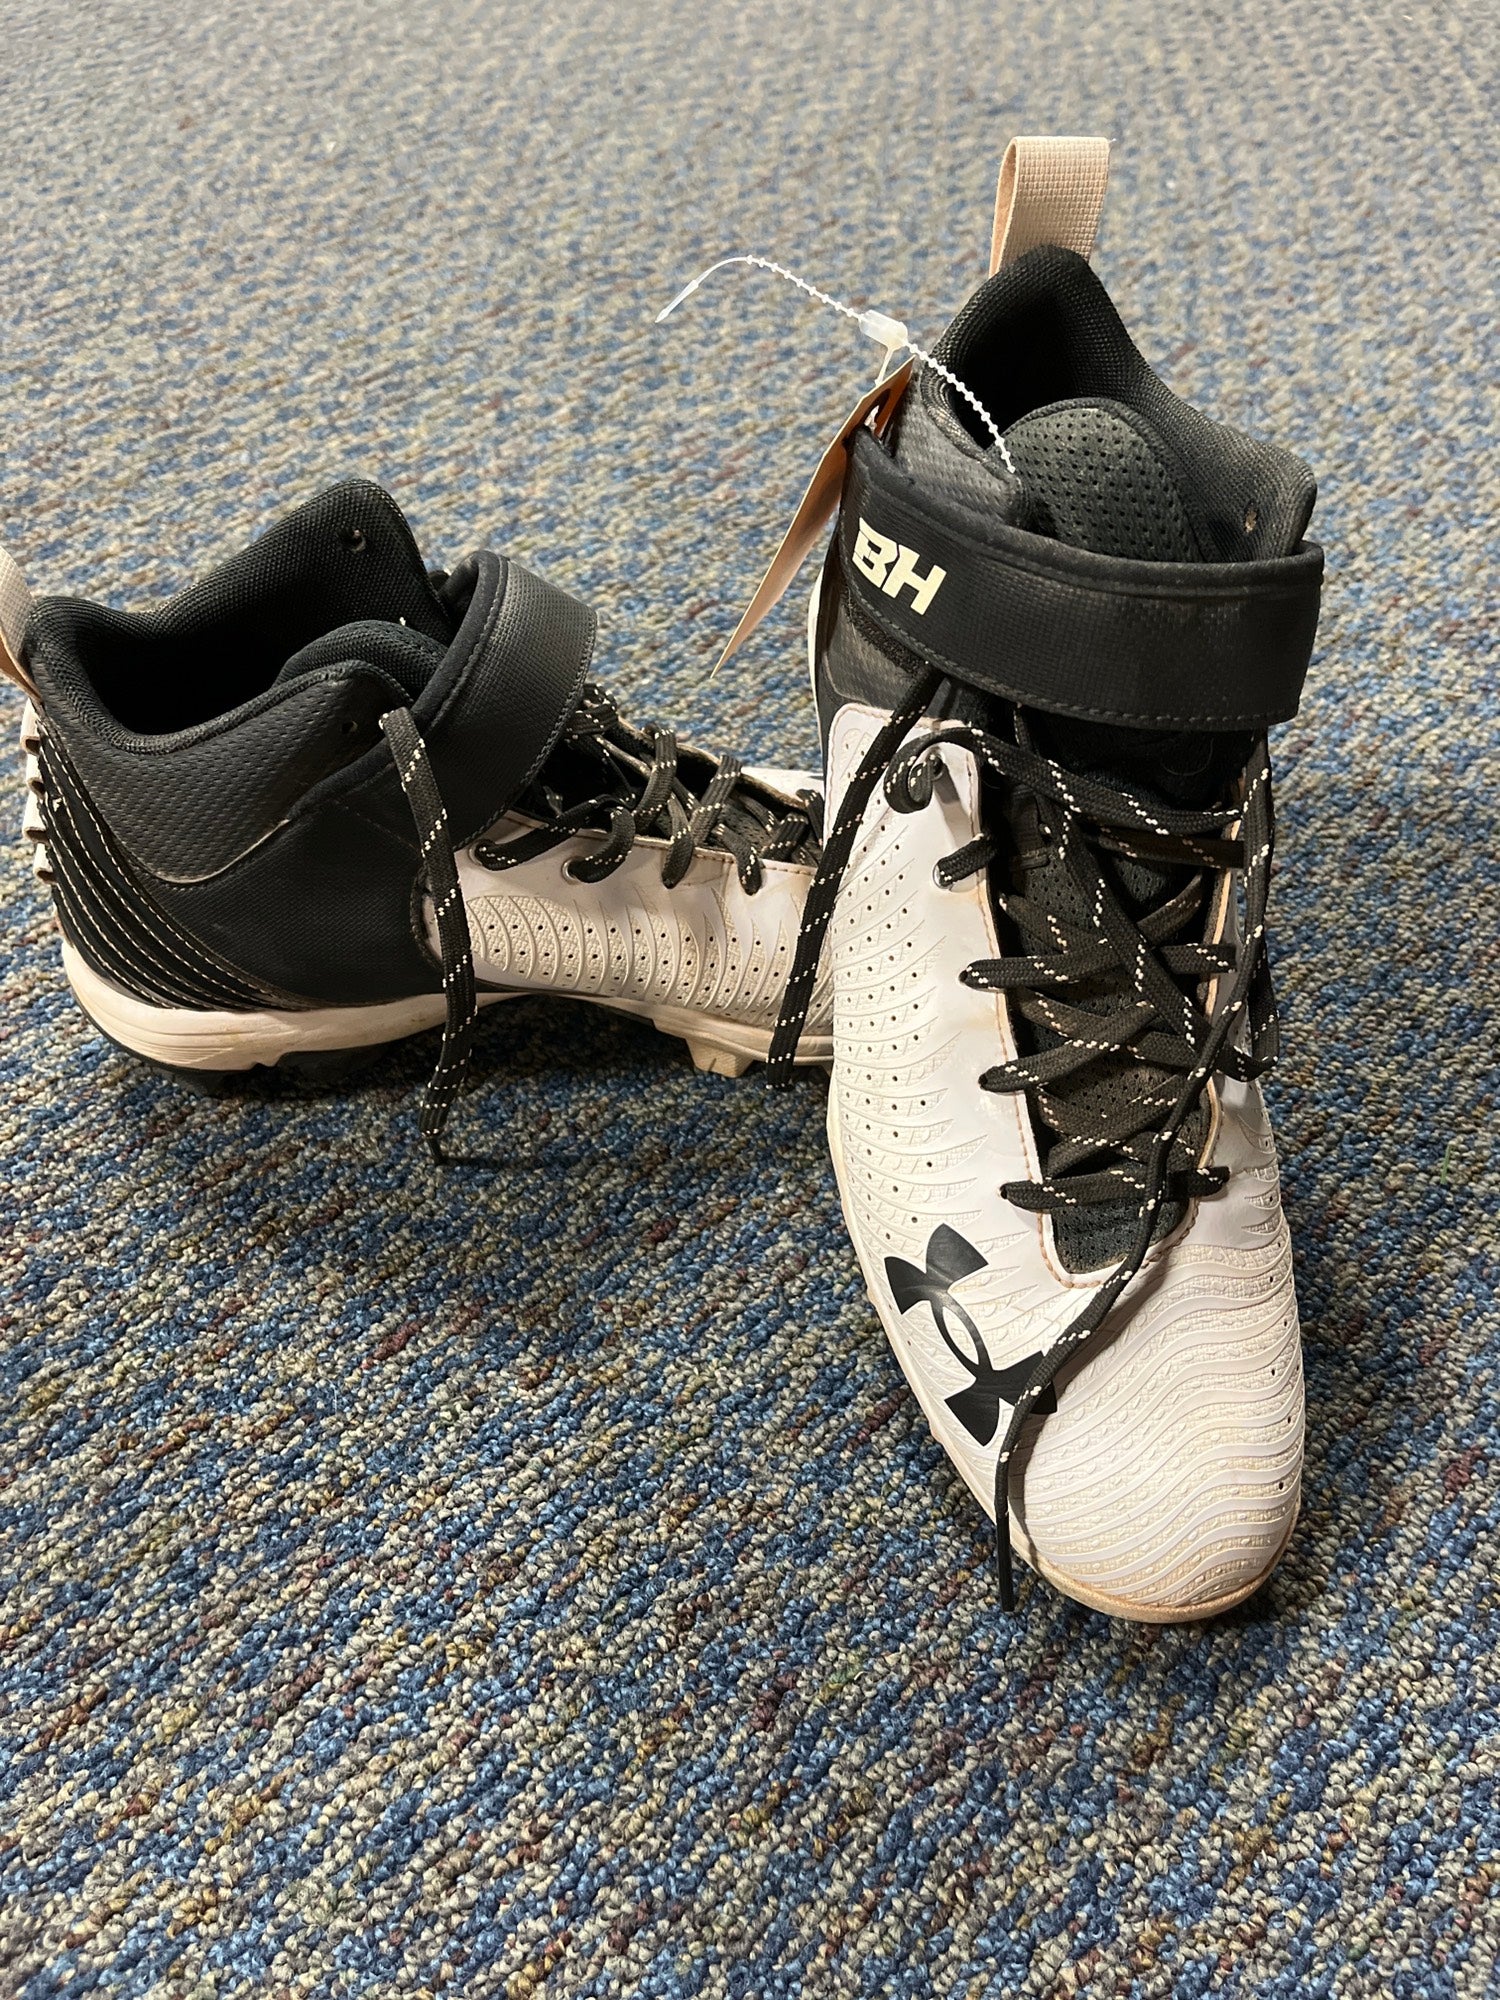 2022 Bryce Harper 6th Edition Under Armour Baseball cleats